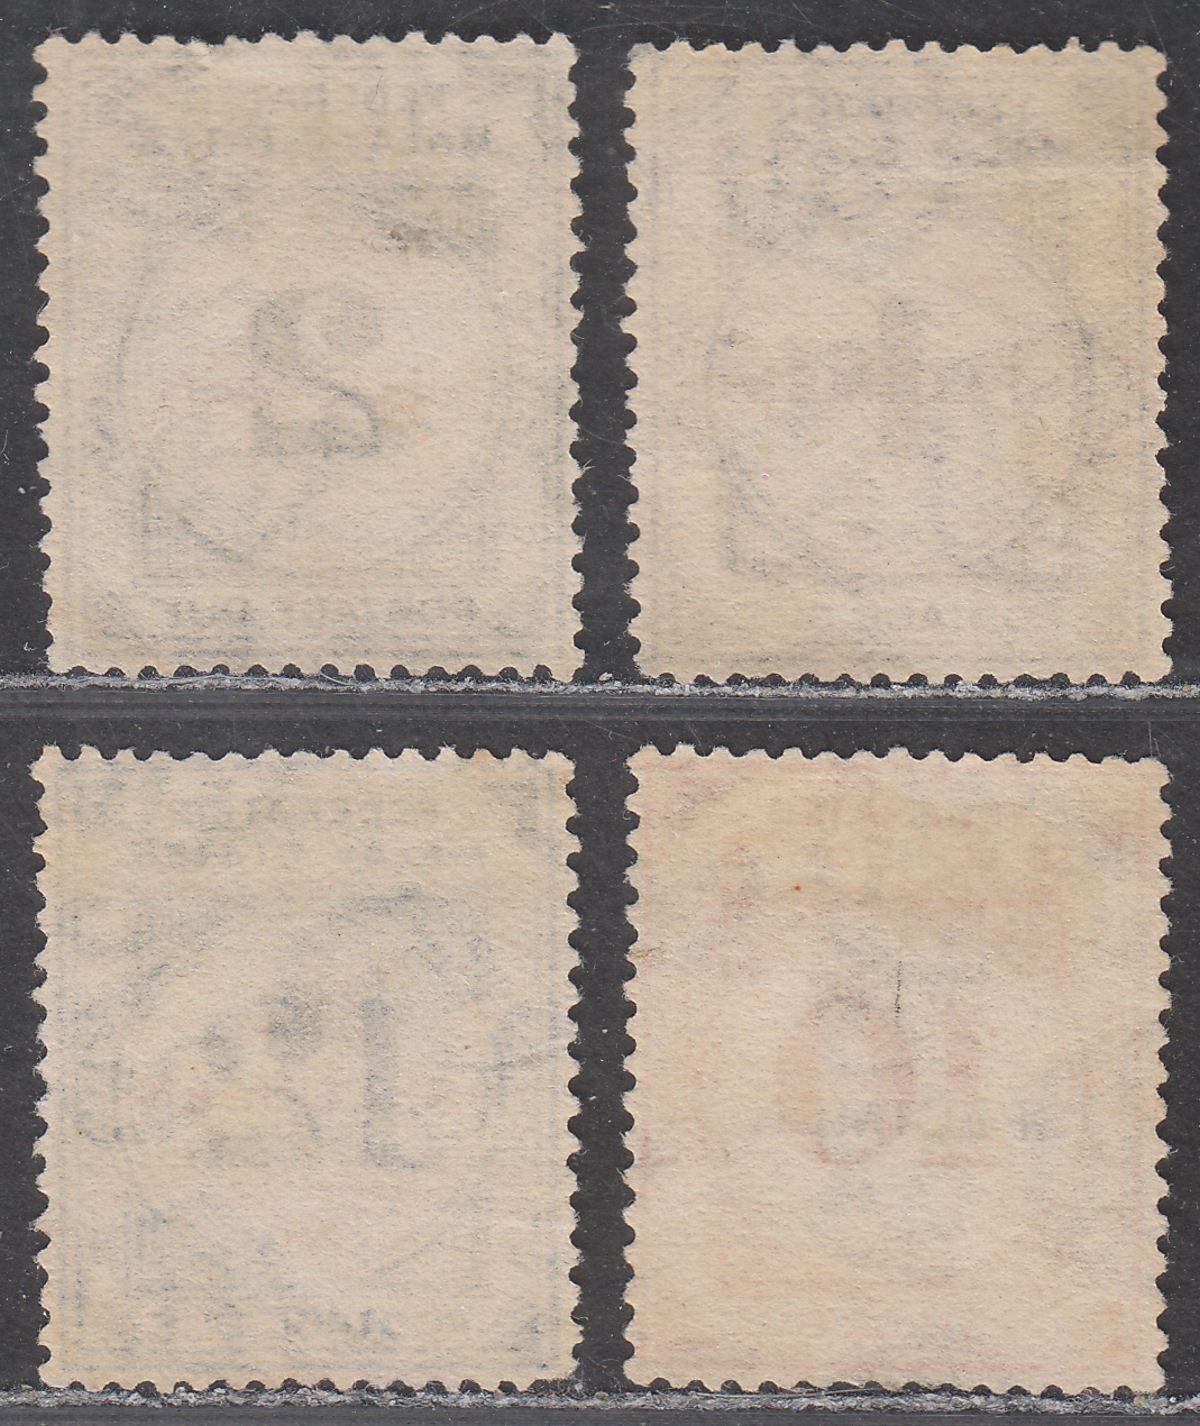 Federated Malay States 1924 KGV SPECIMEN Opt Postage Due Part Set to 12c Unused